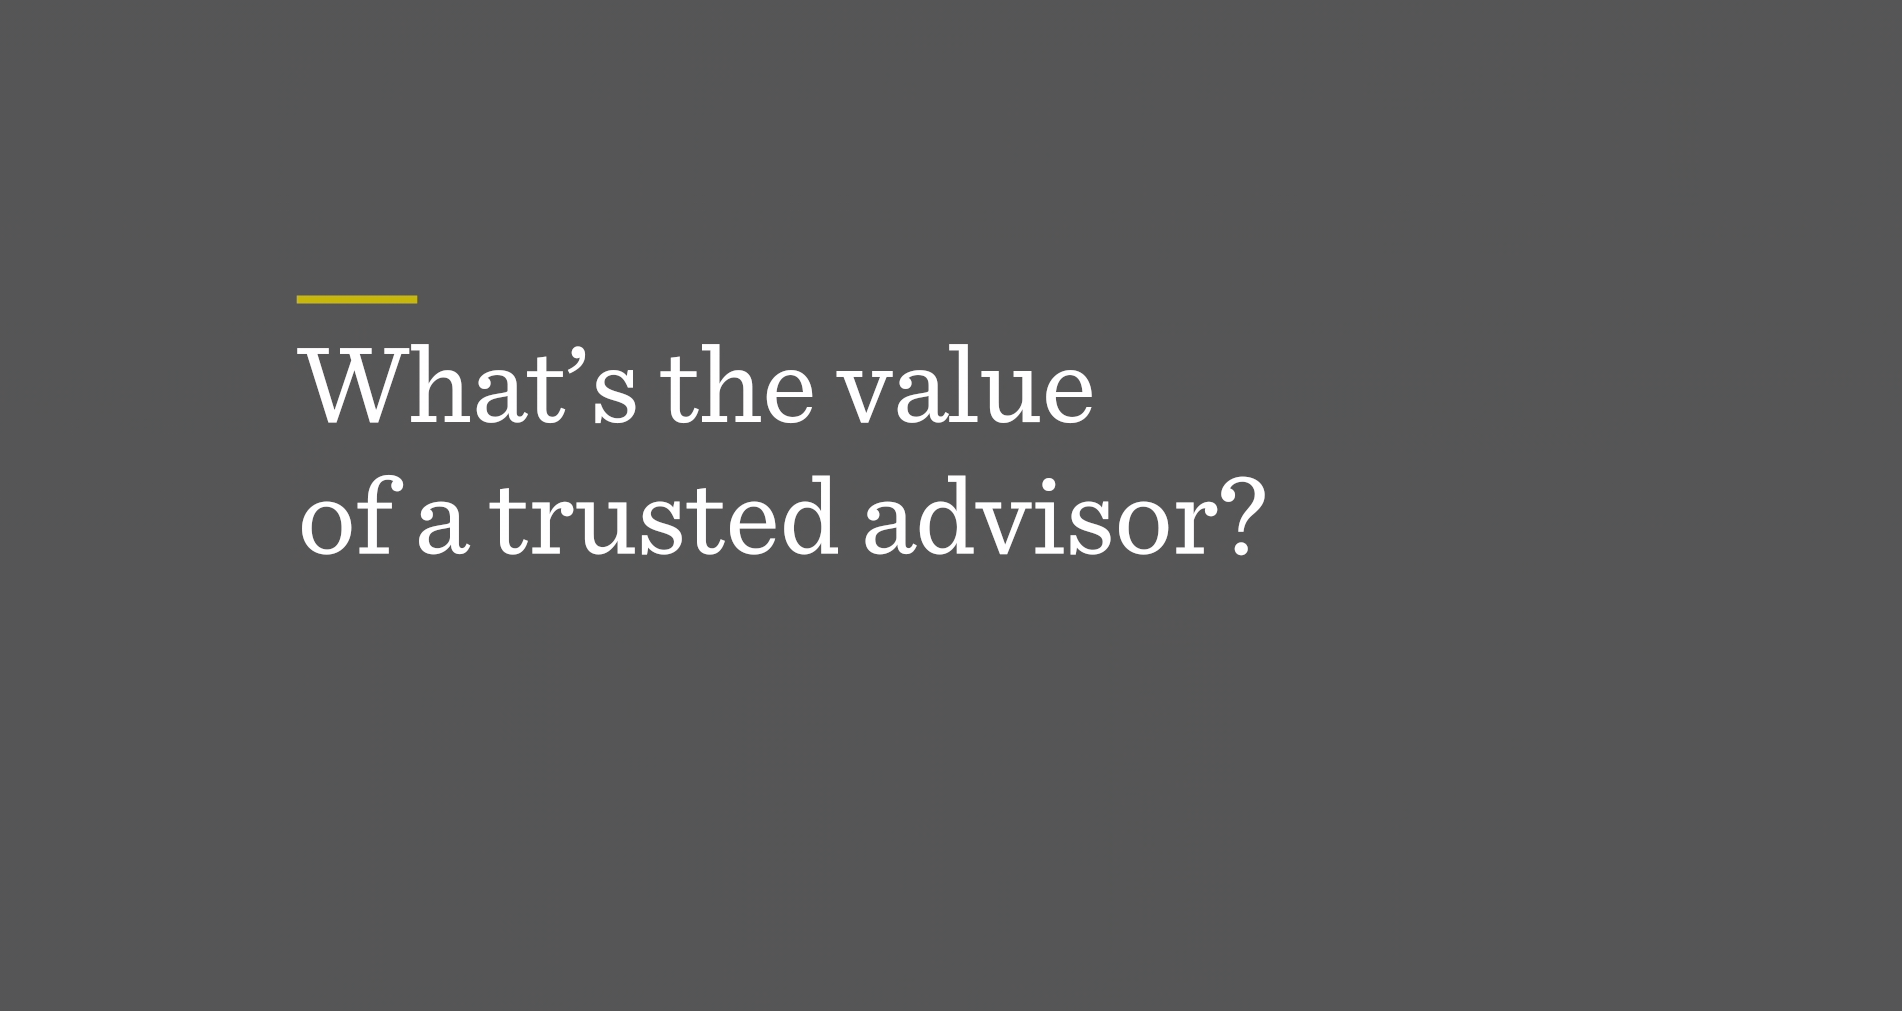 What's the value of a trusted advisor?